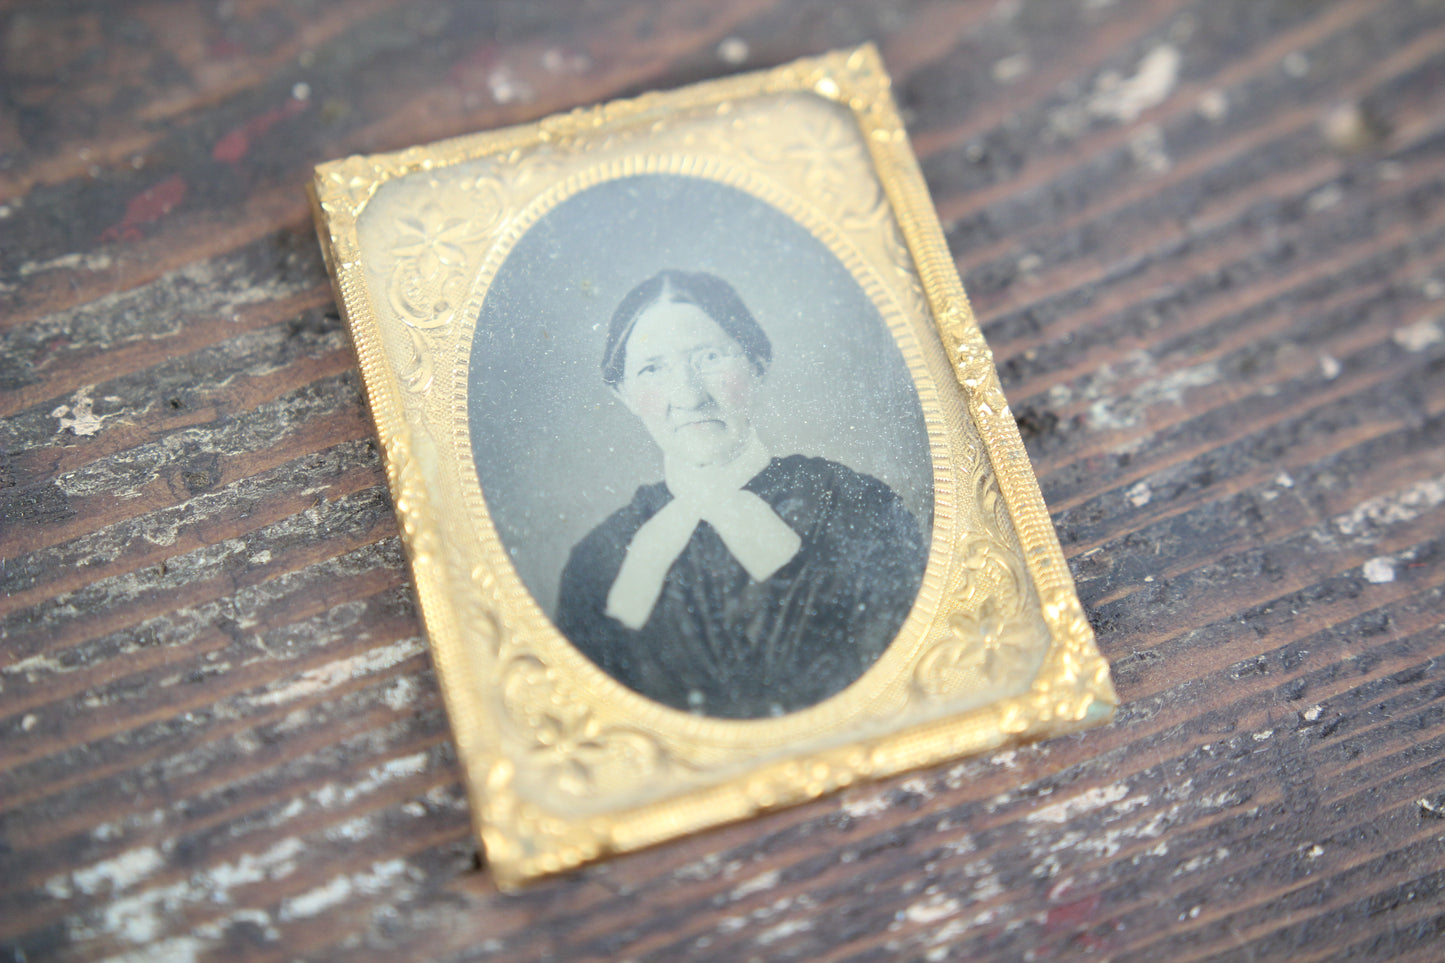 Ambrotype Photograph of an Older Woman with Glasses